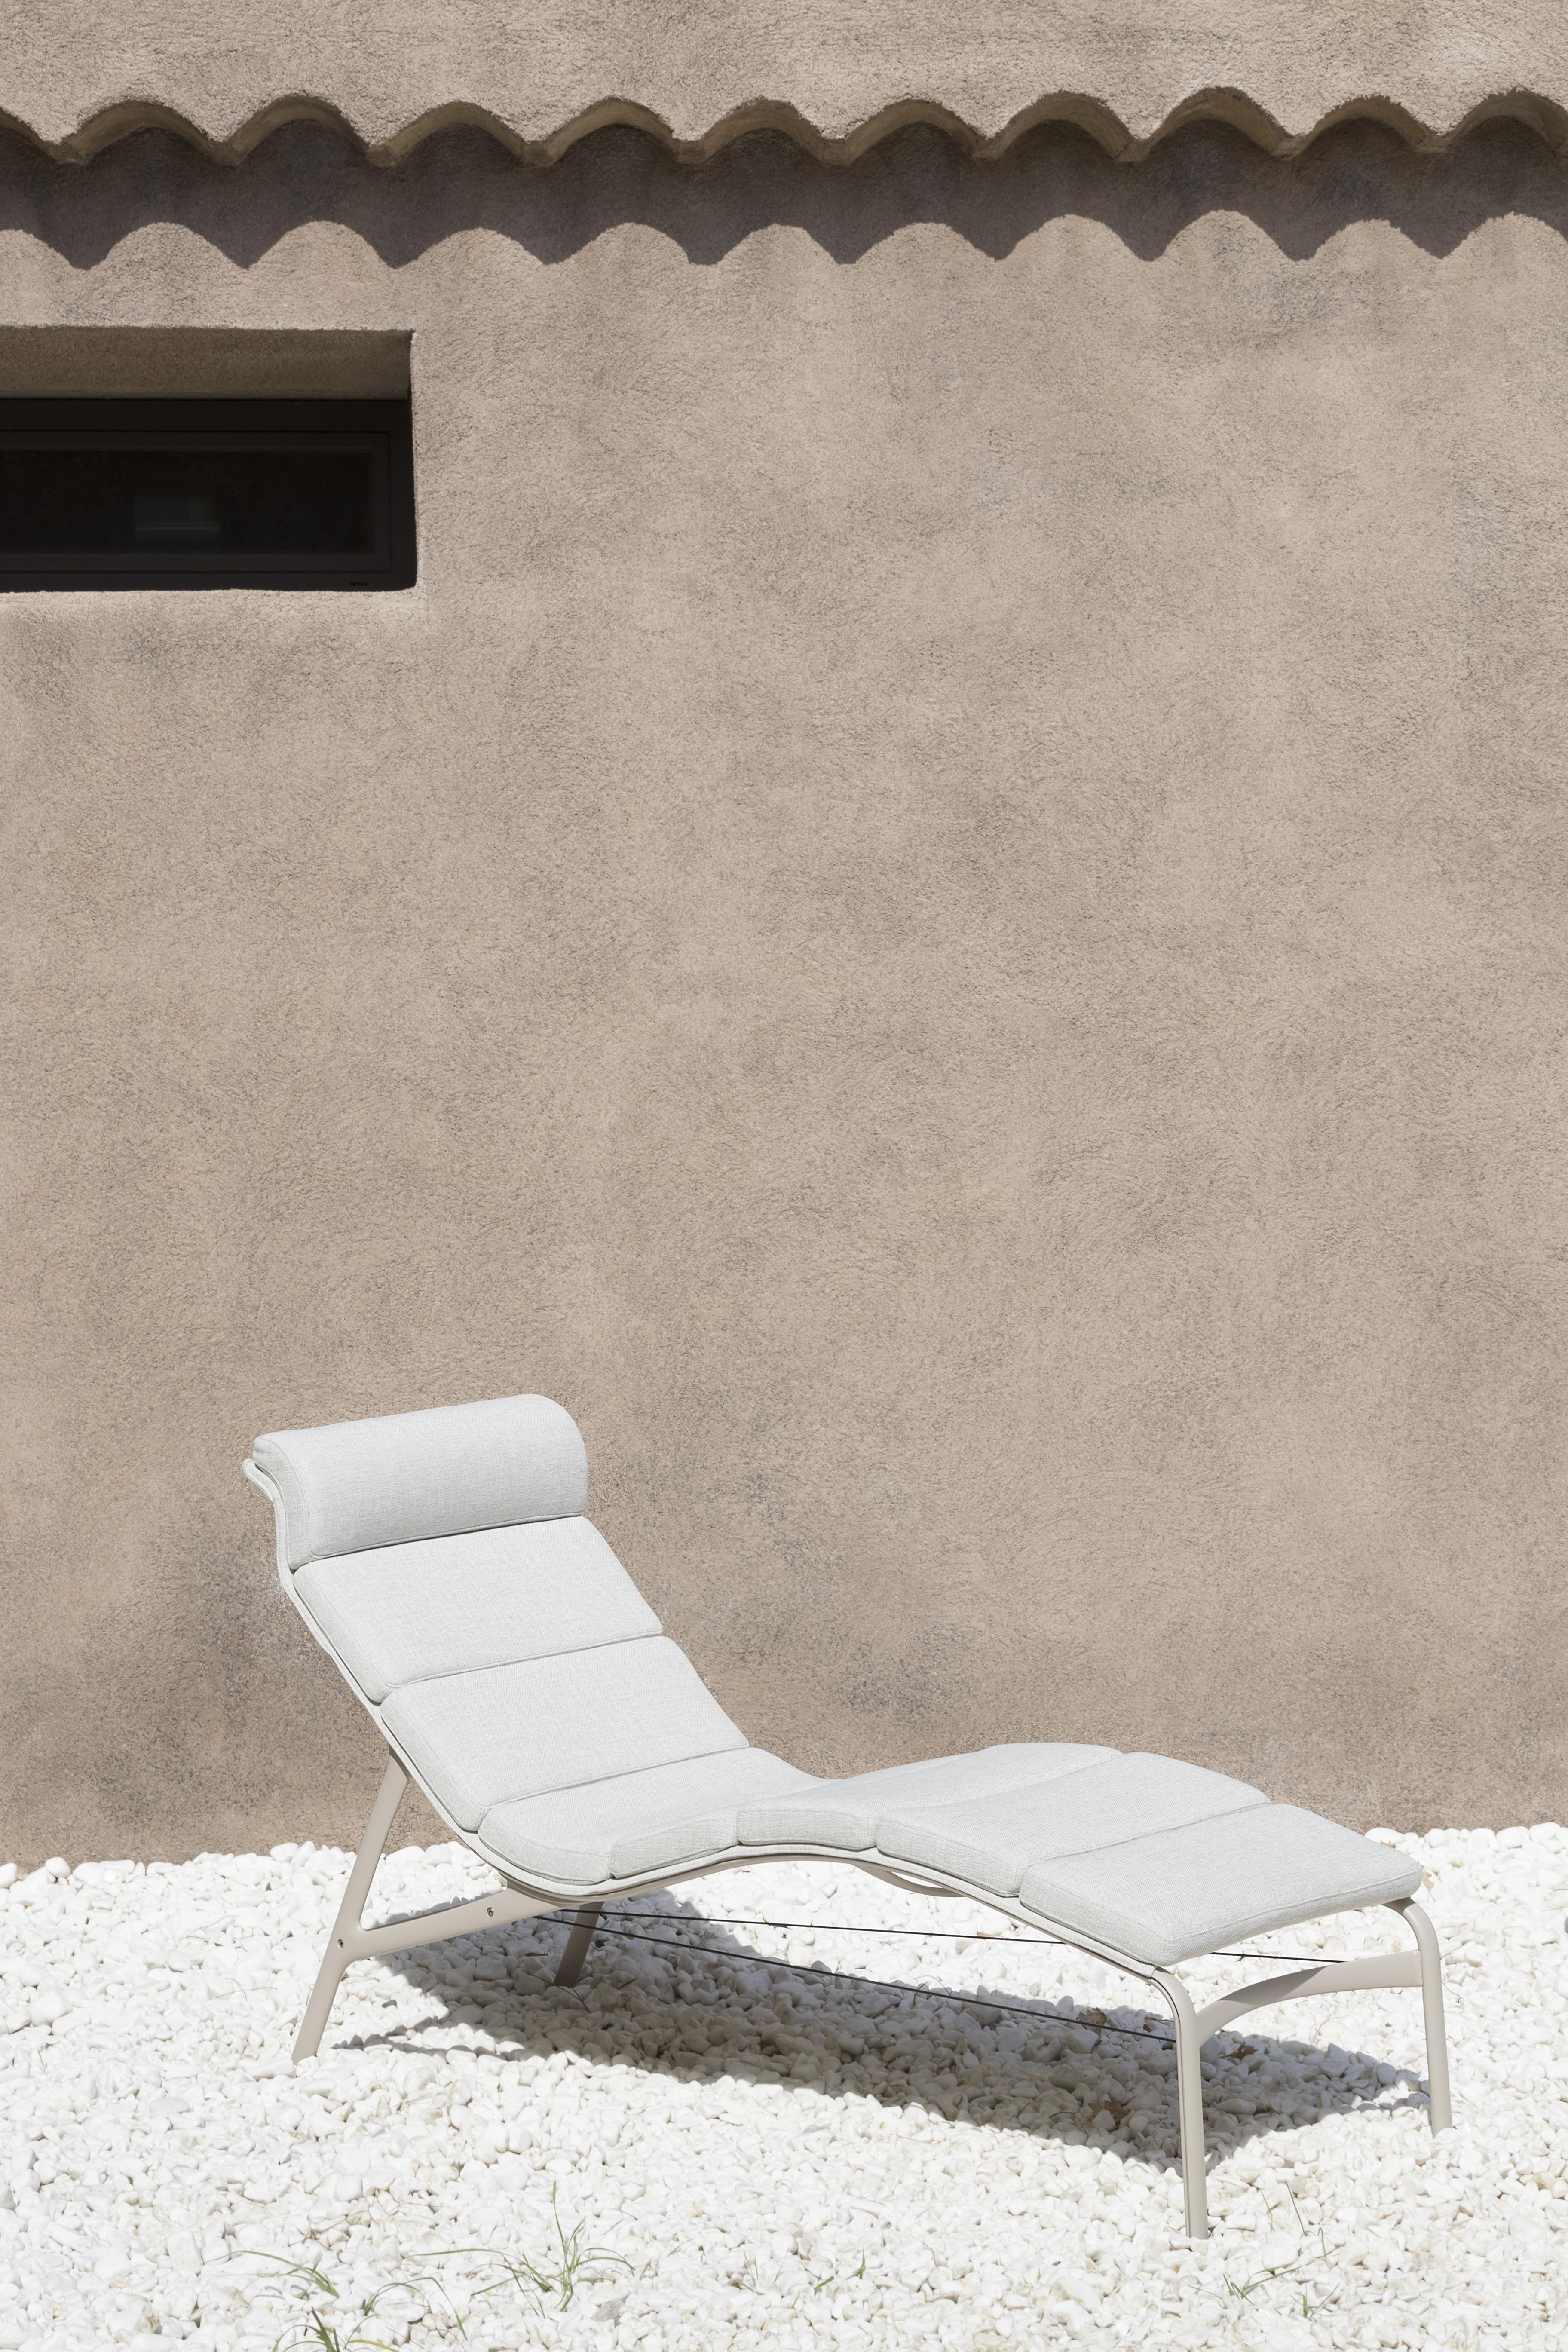 Alias 414 Longframe Soft Outdoor Chair in Grey & White Lacquered Aluminum Frame For Sale 1